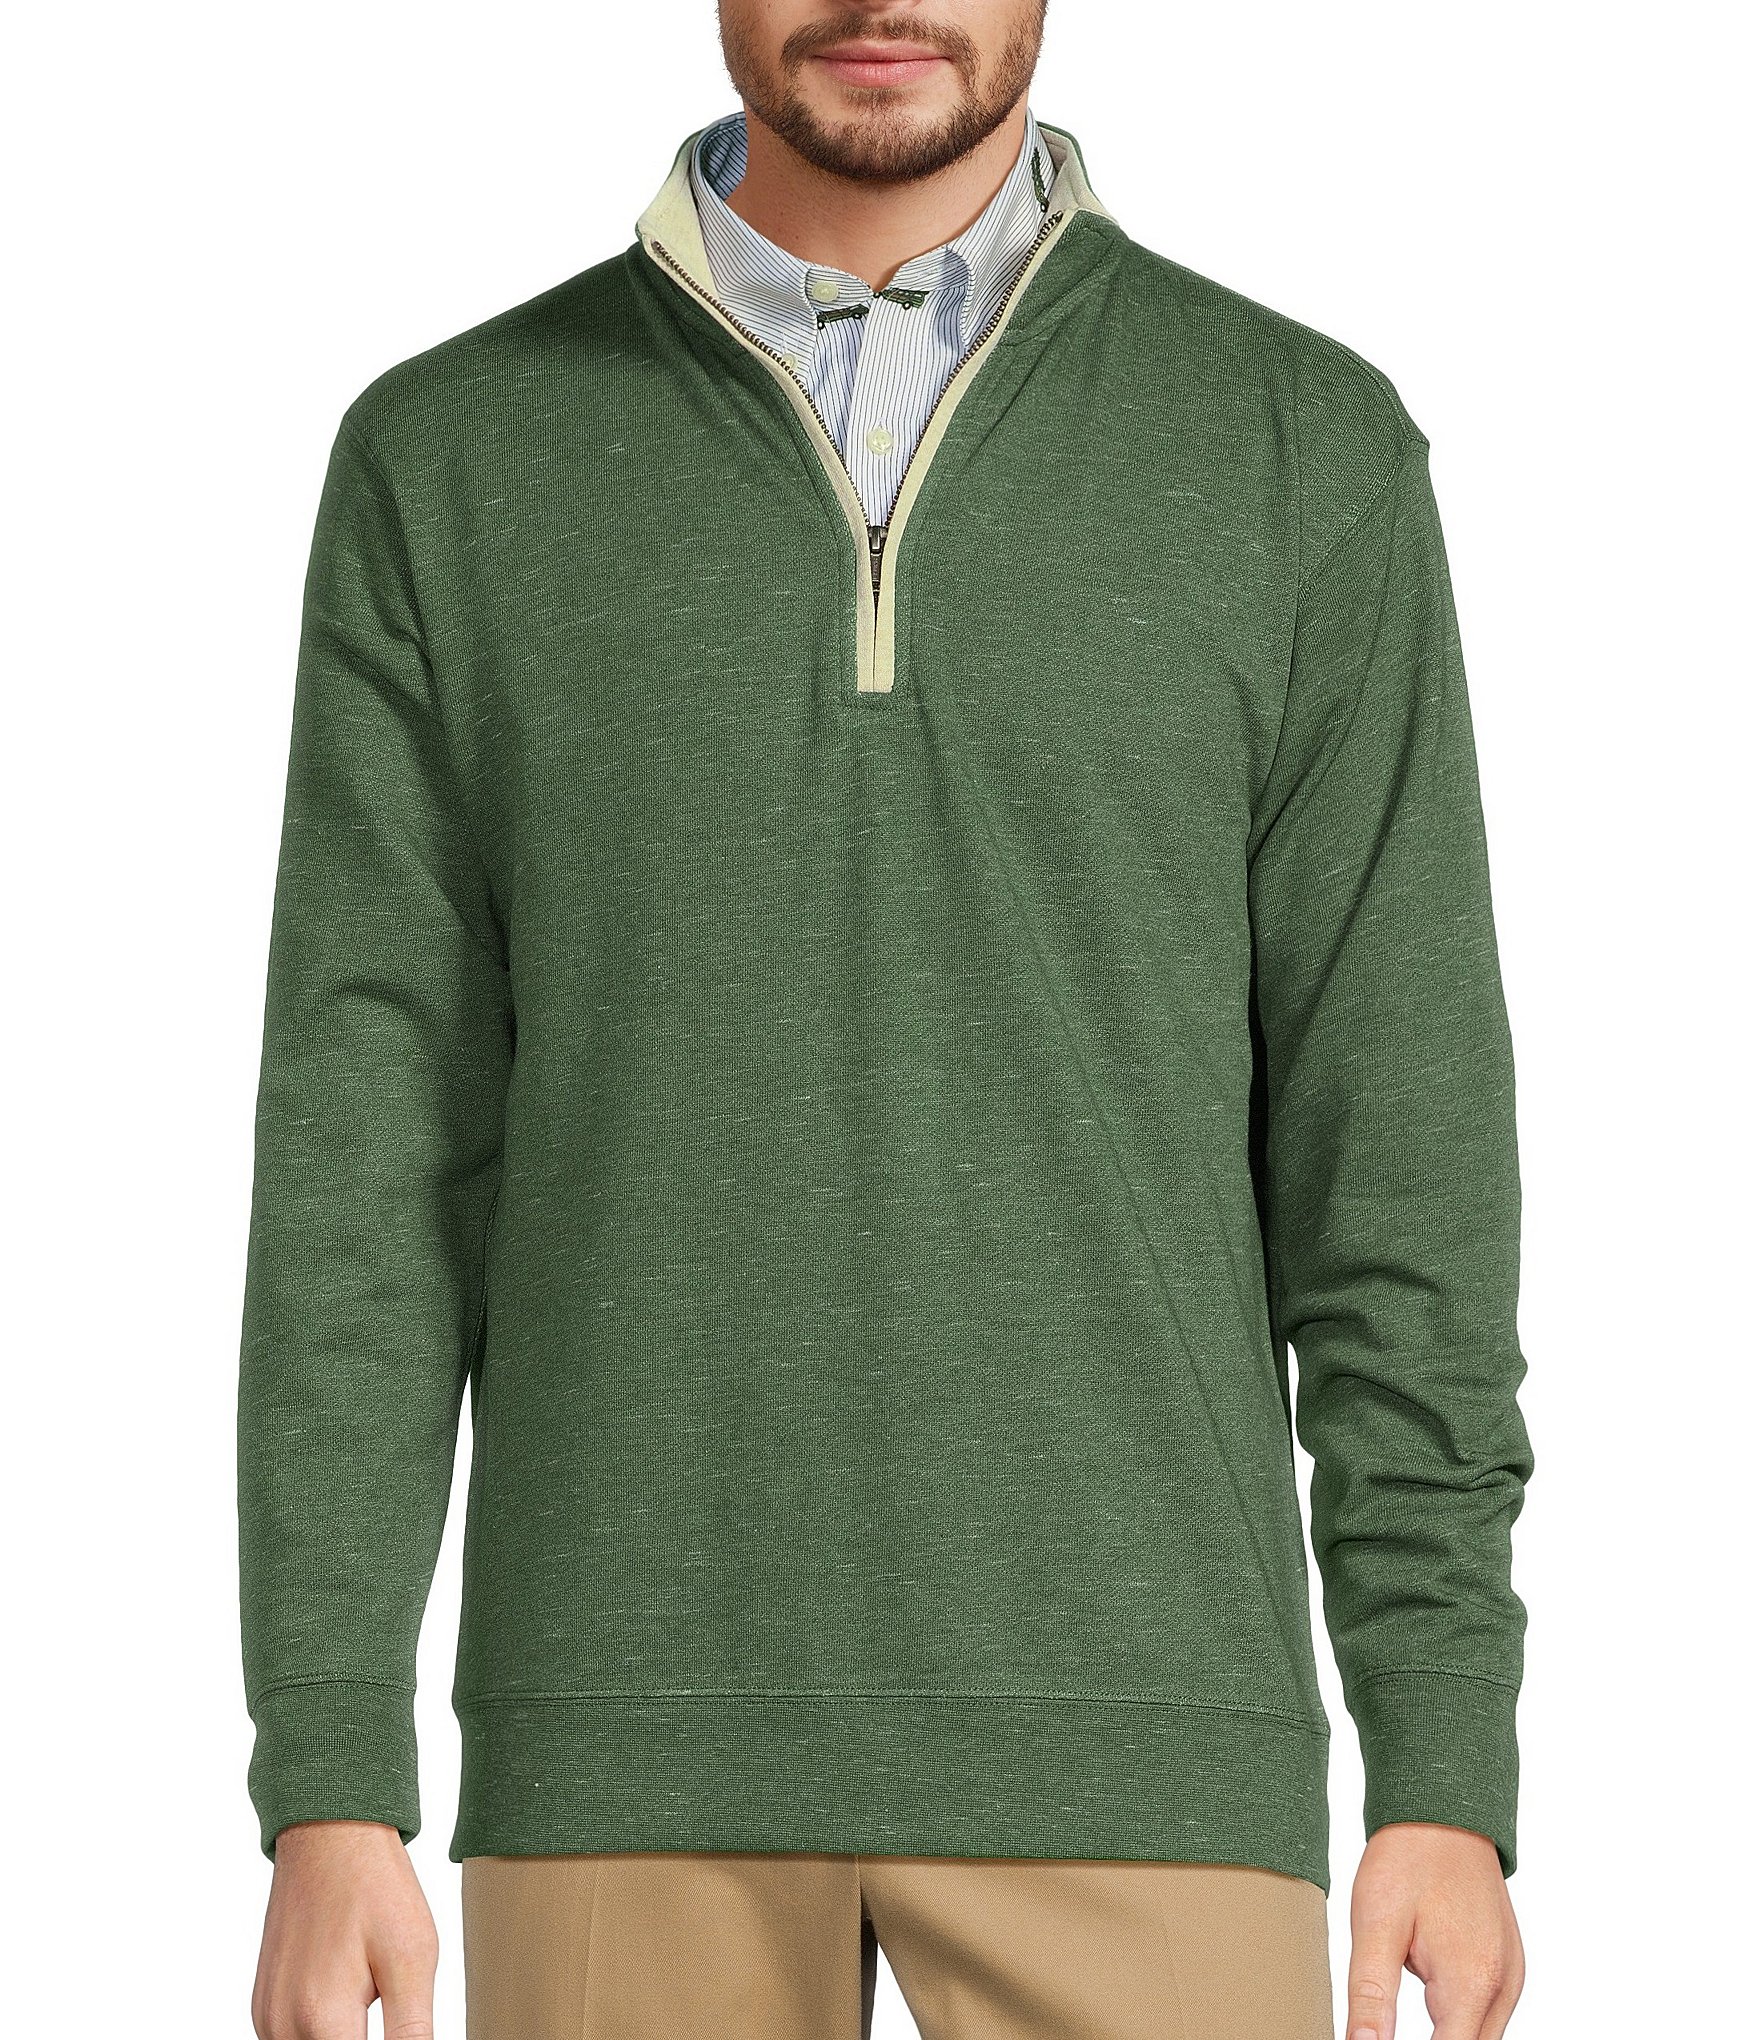 Roundtree & Yorke Long Sleeve Solid Reversible Quarter-Zip Pullover